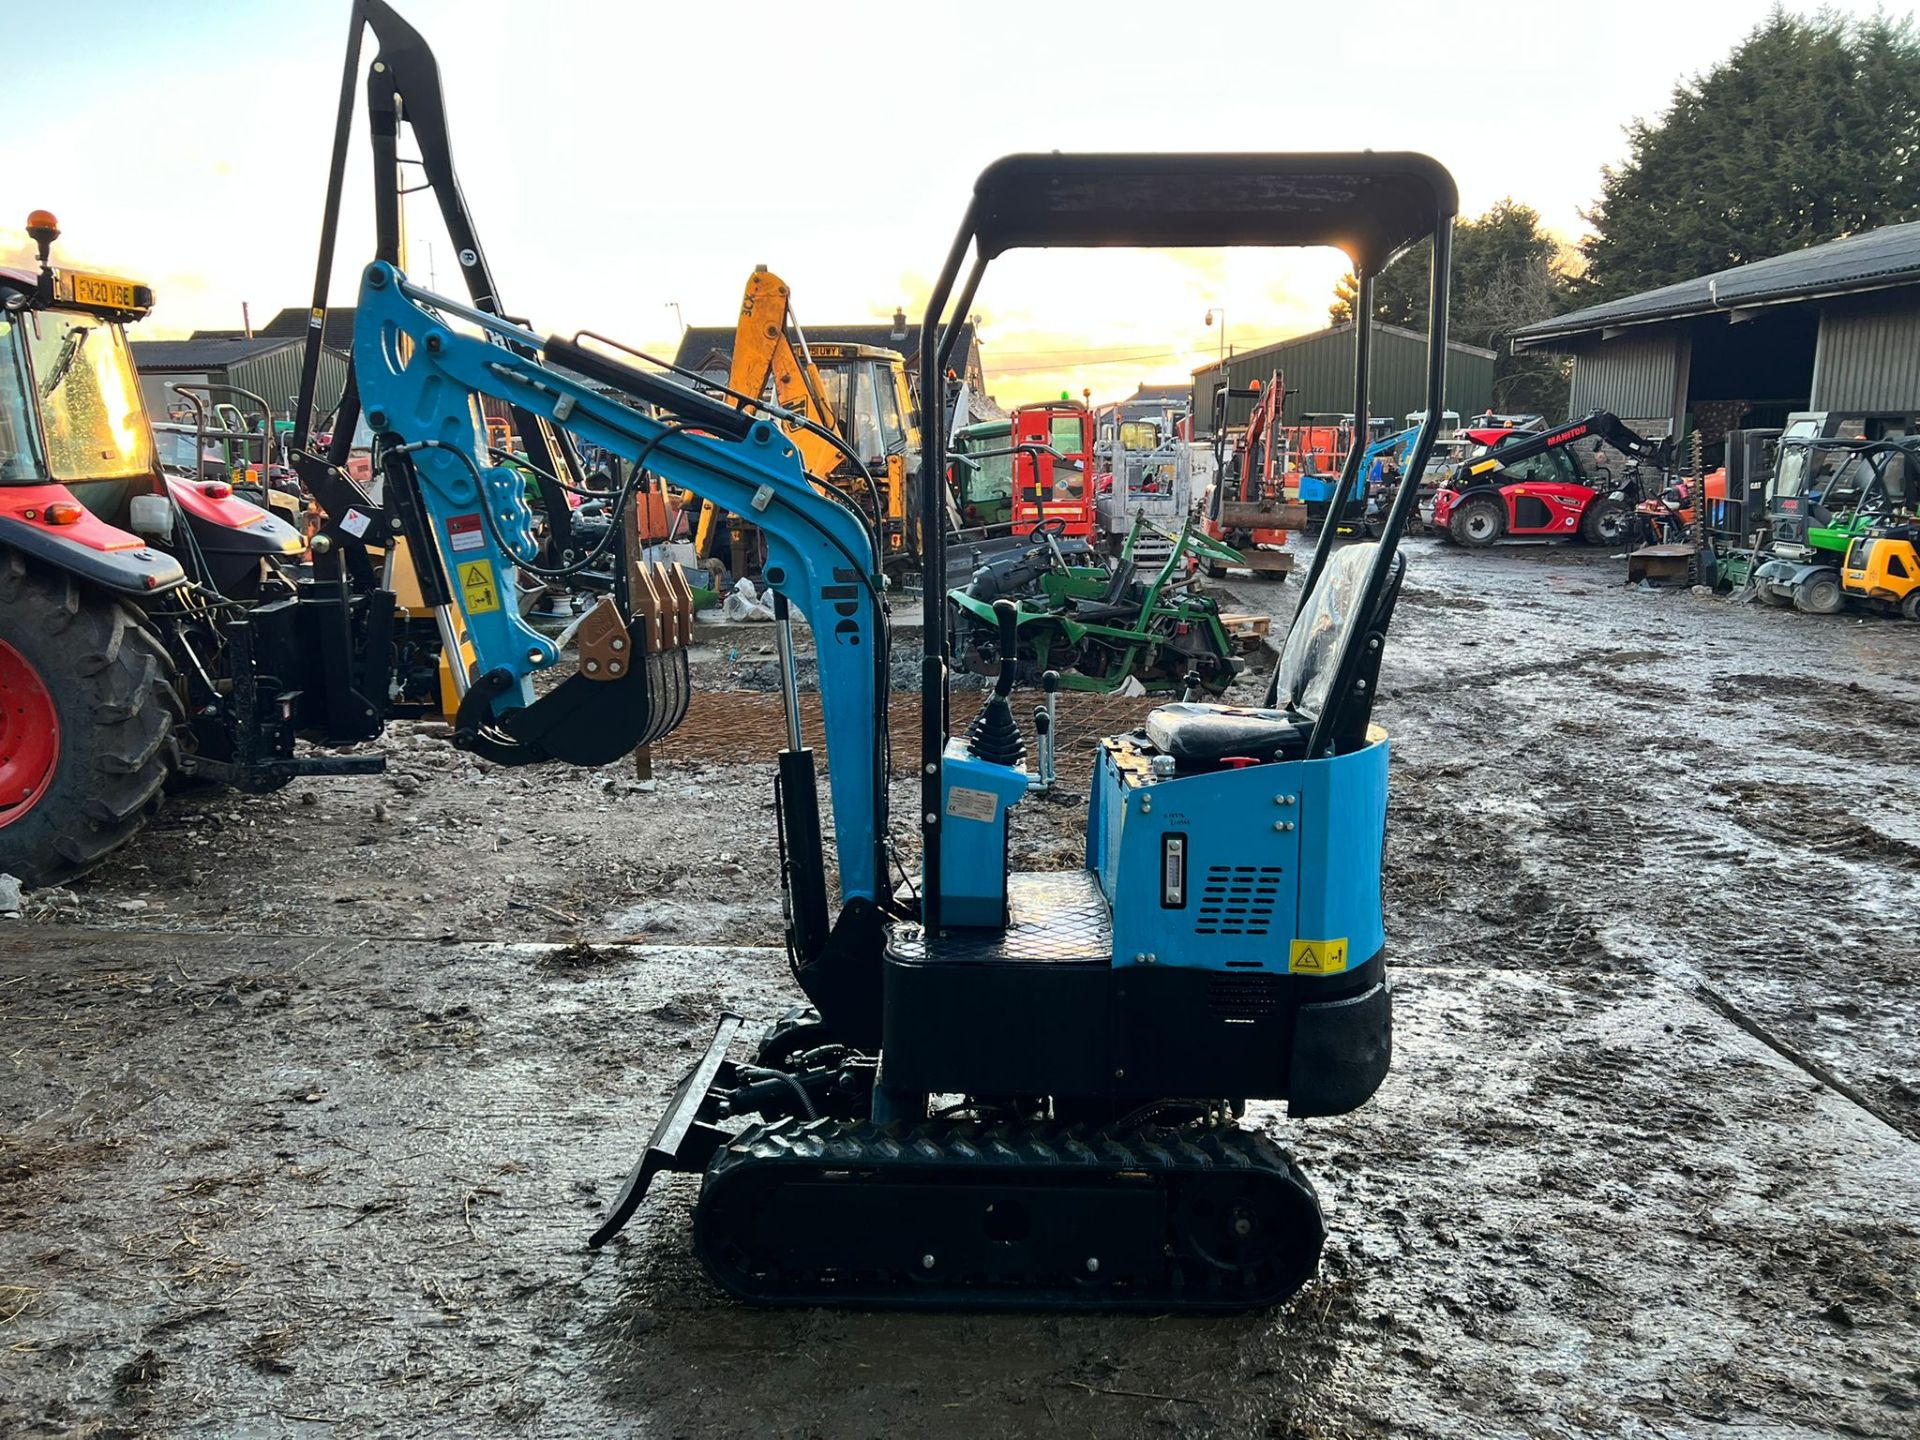 NEW AND UNUSED JPC HT12 1 TON MINI DIGGER, RUNS DRIVES AND DIGS, PIPED FOR FRONT ATTACHMENTS - Image 3 of 11